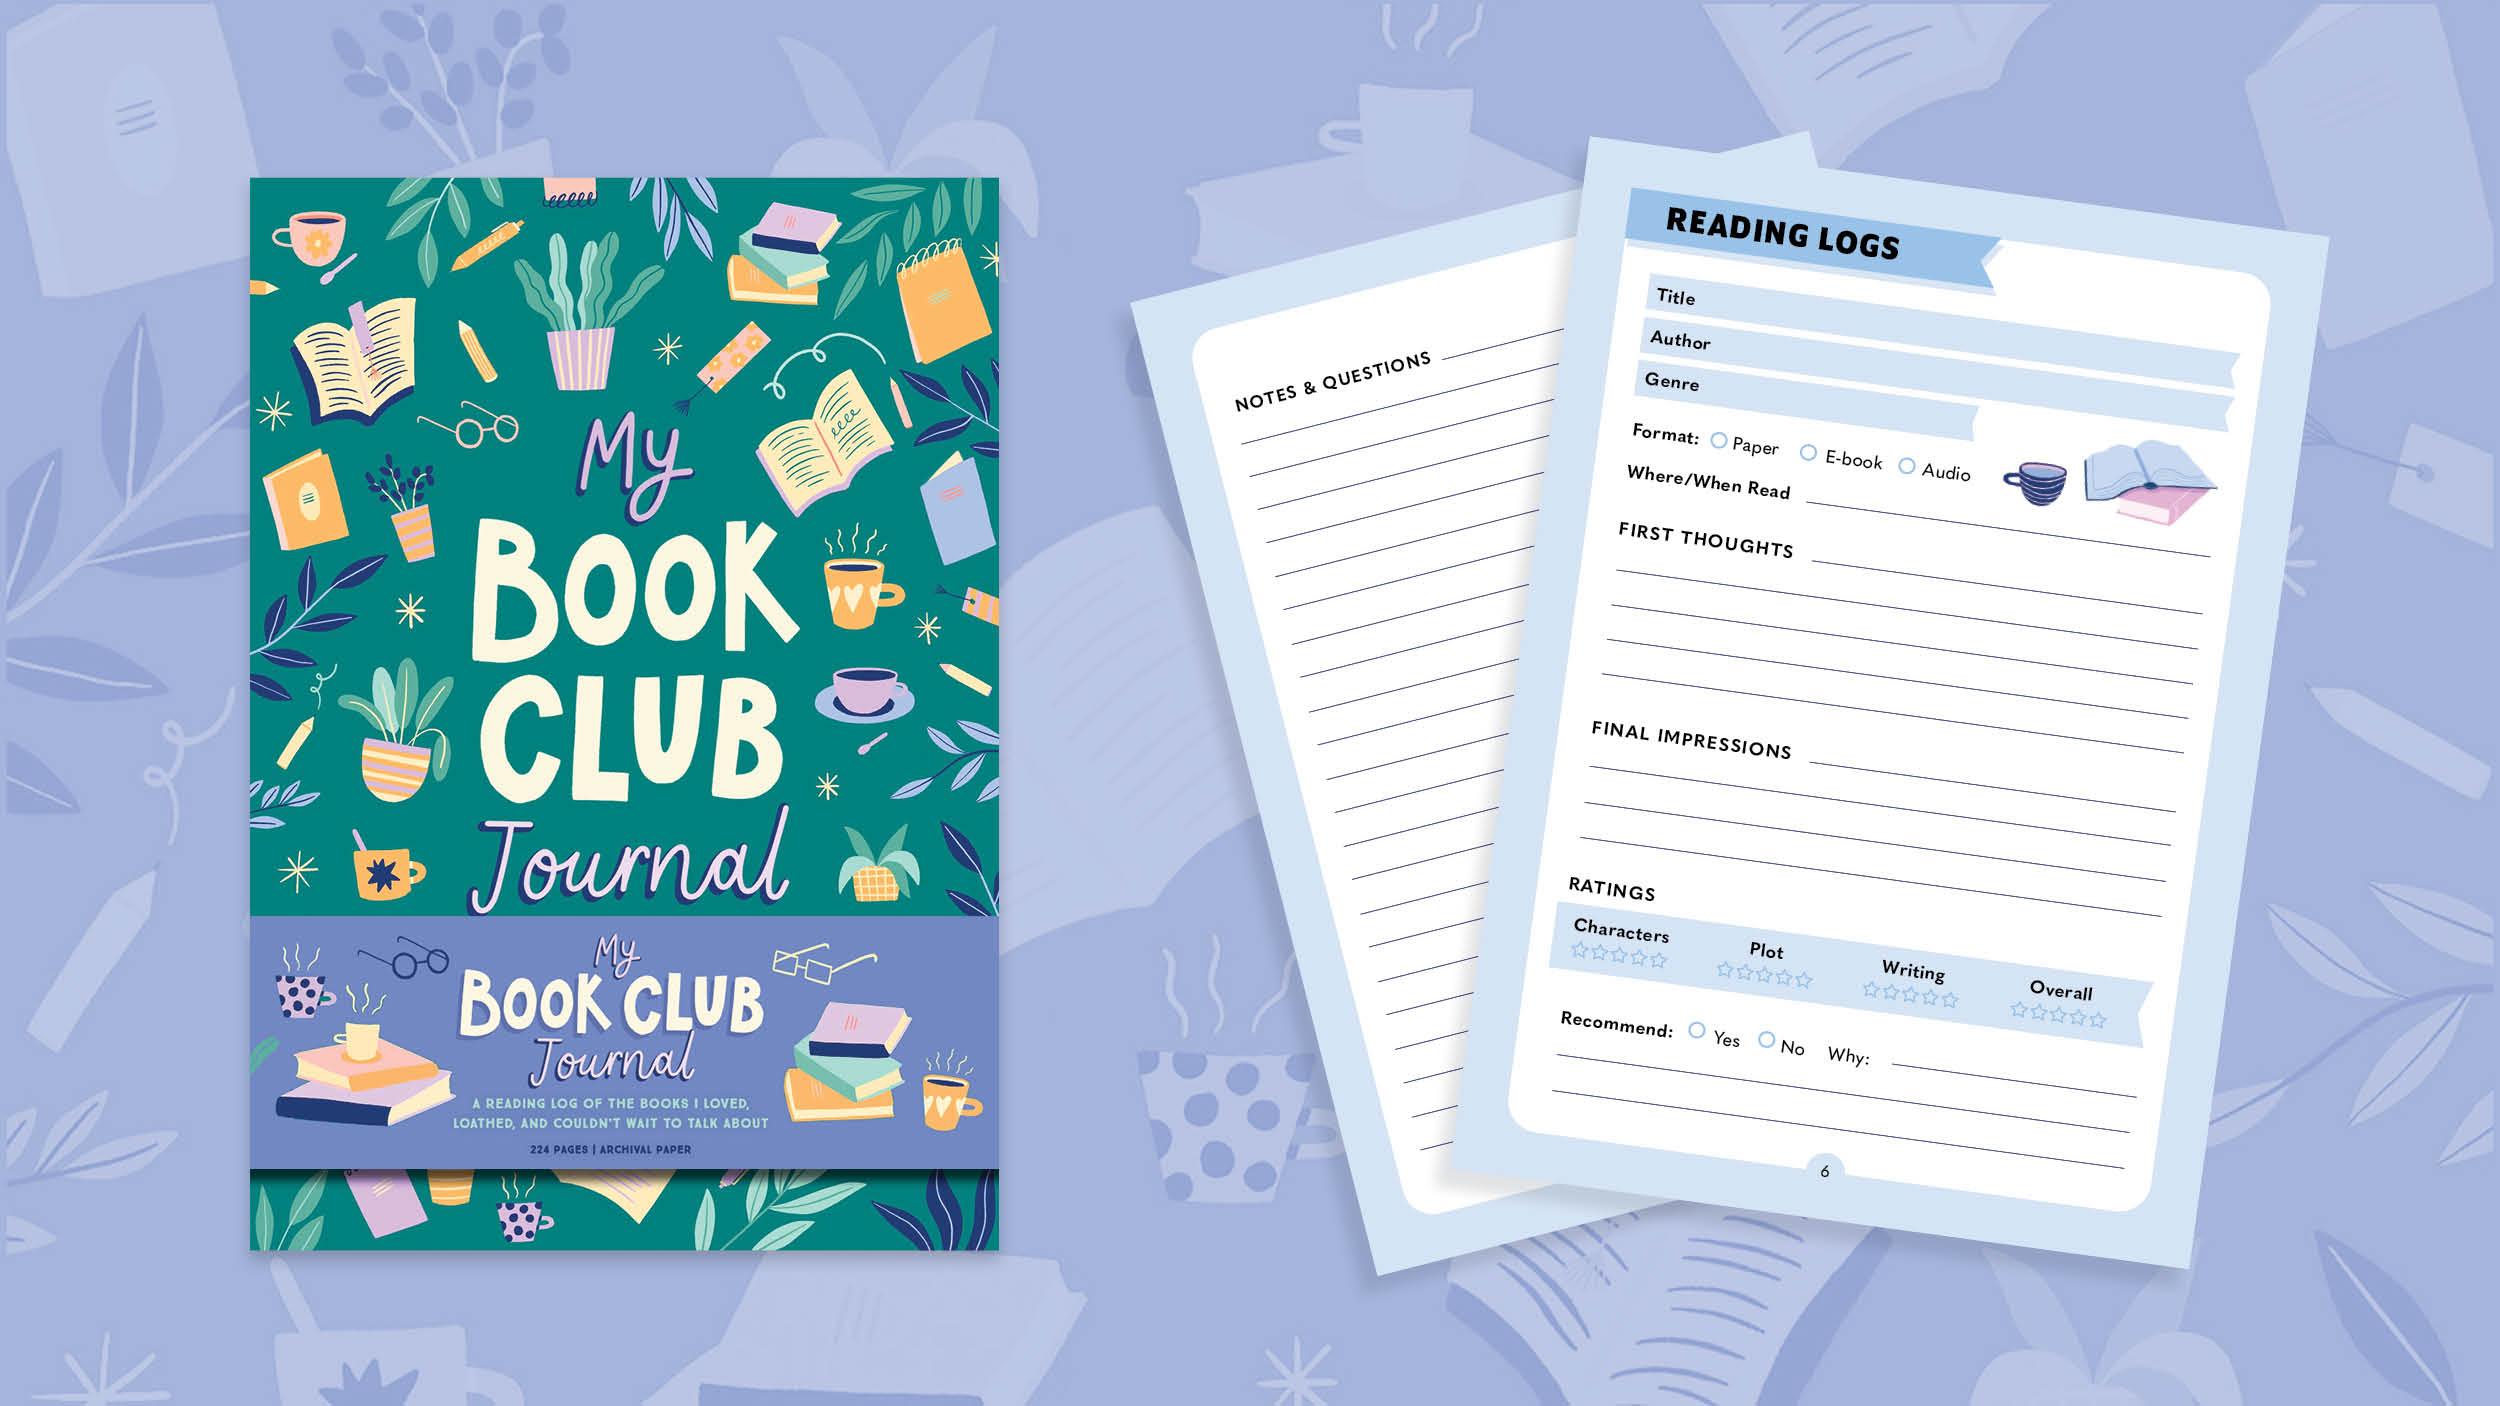  Book Club Journal: A guided reading journal and book